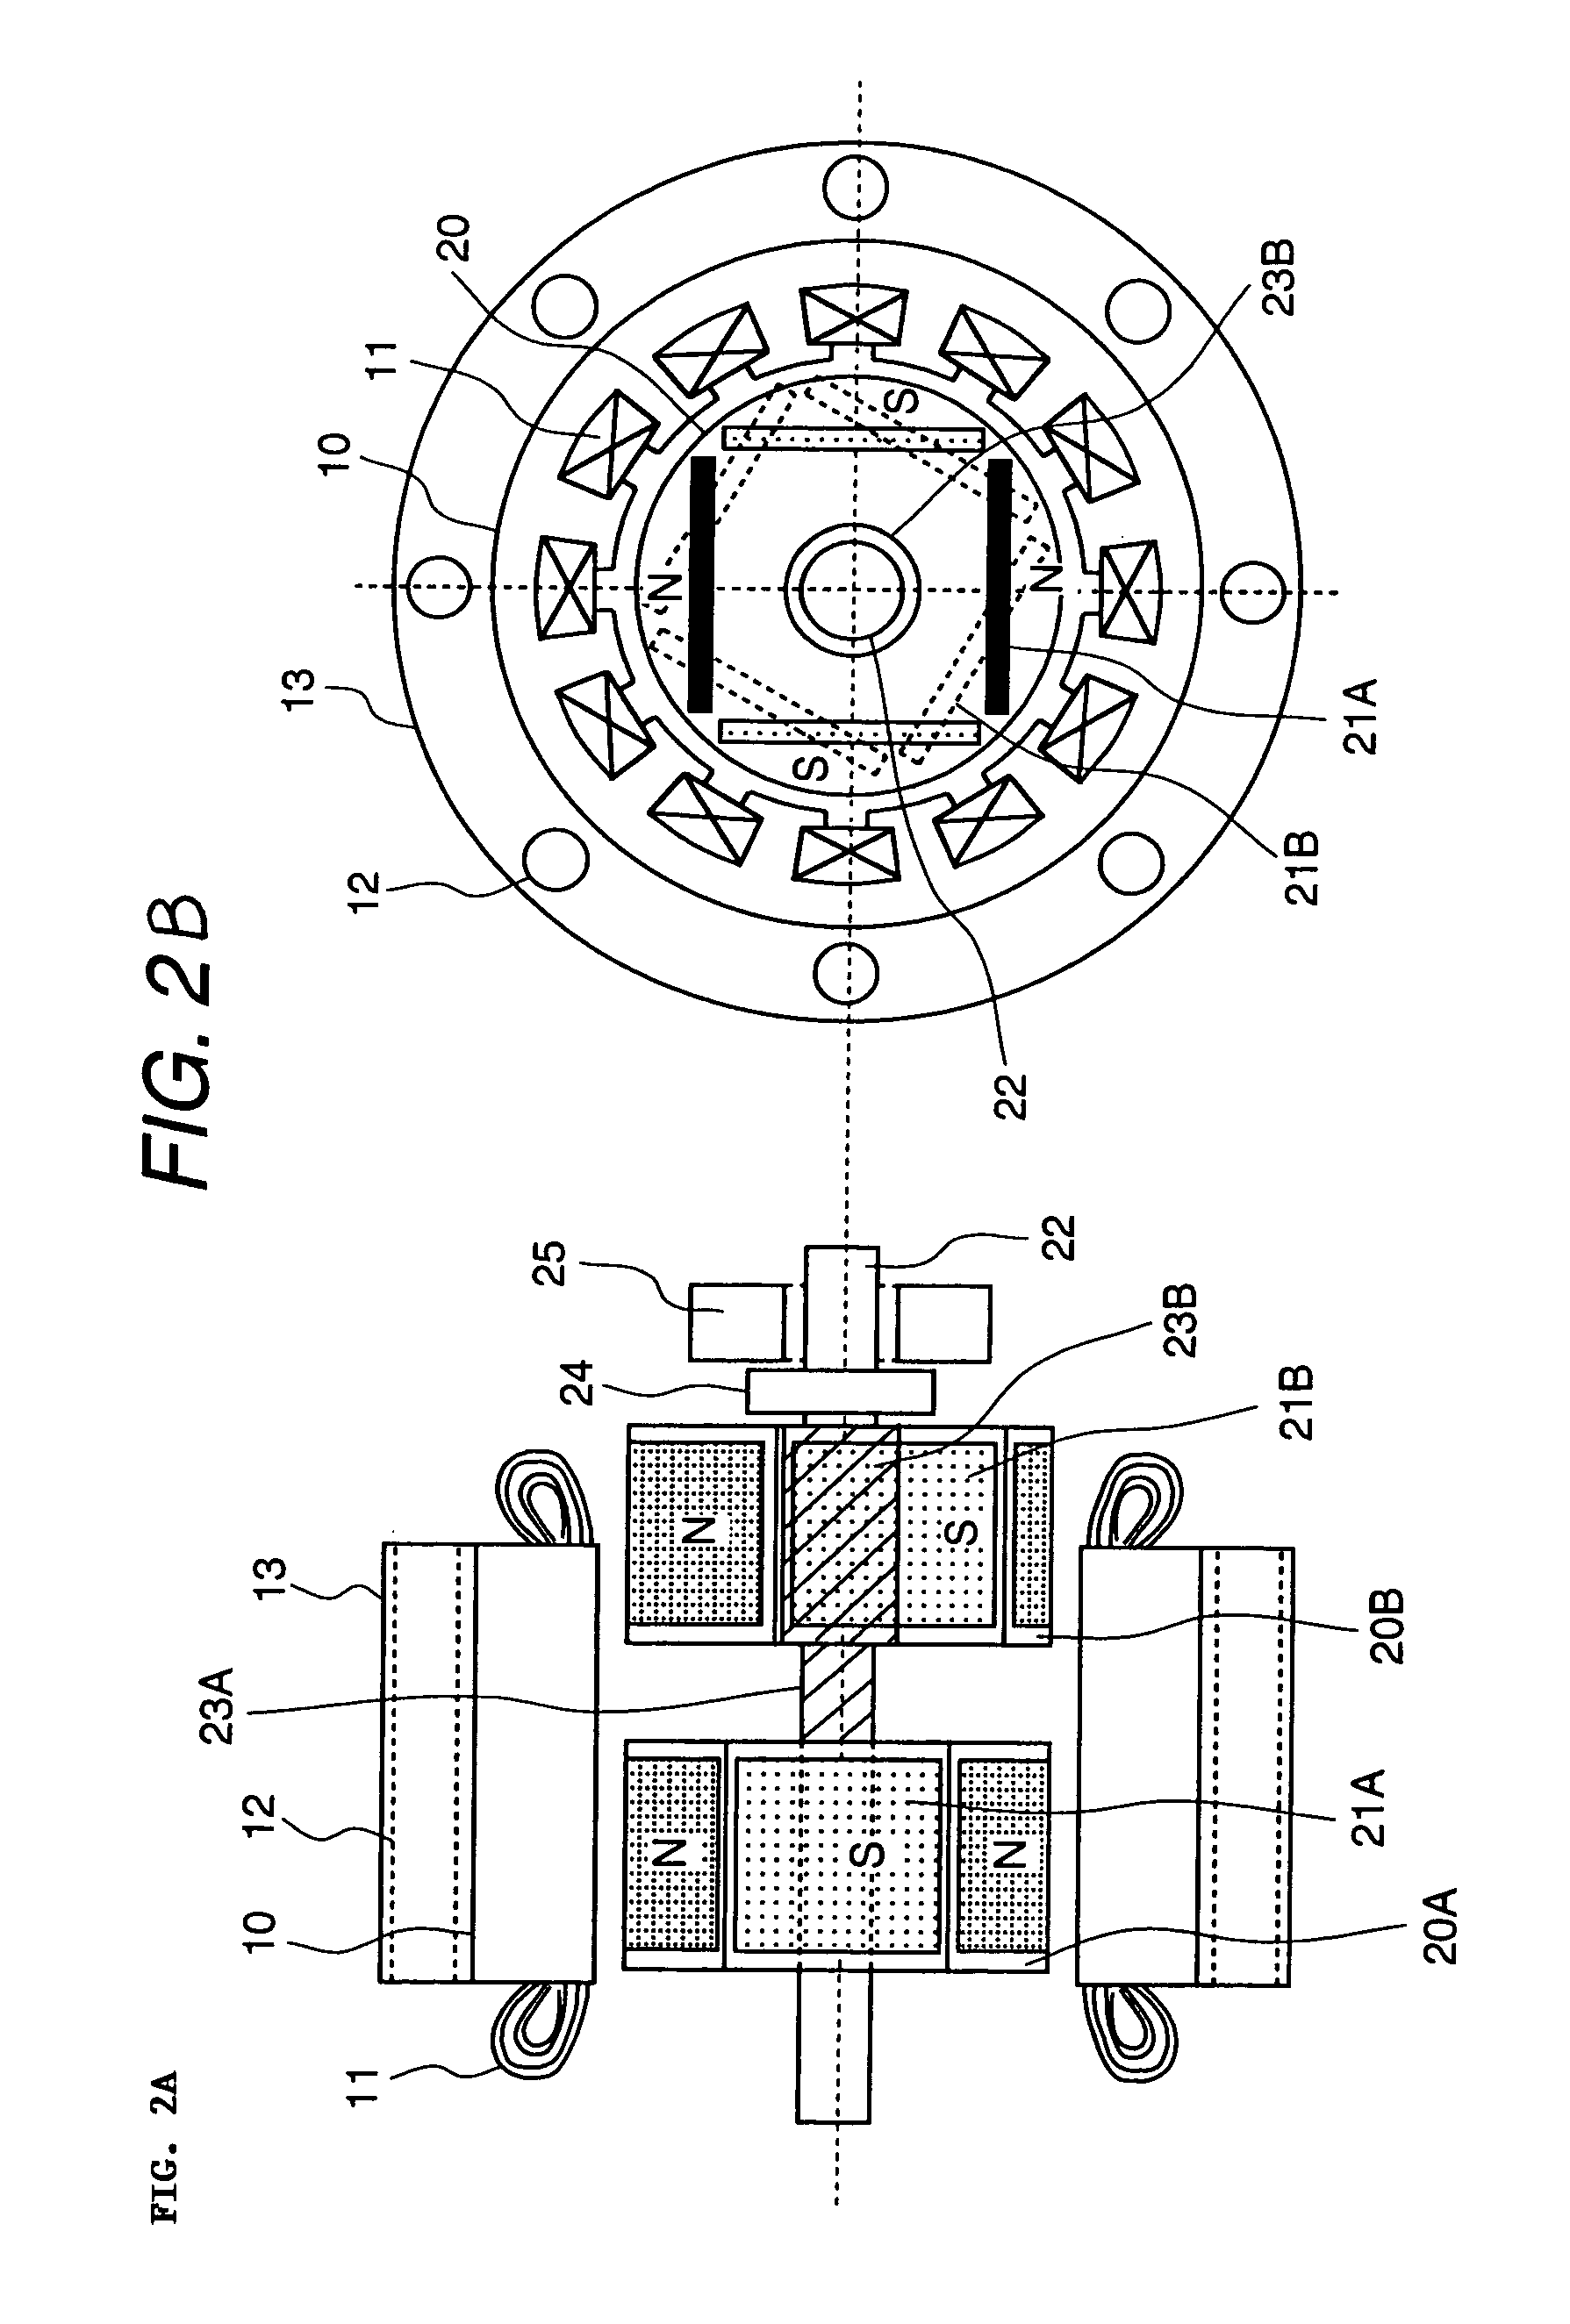 Dynamo-electric machine having a rotor with first and second axially or rotationally displaceable field magnets